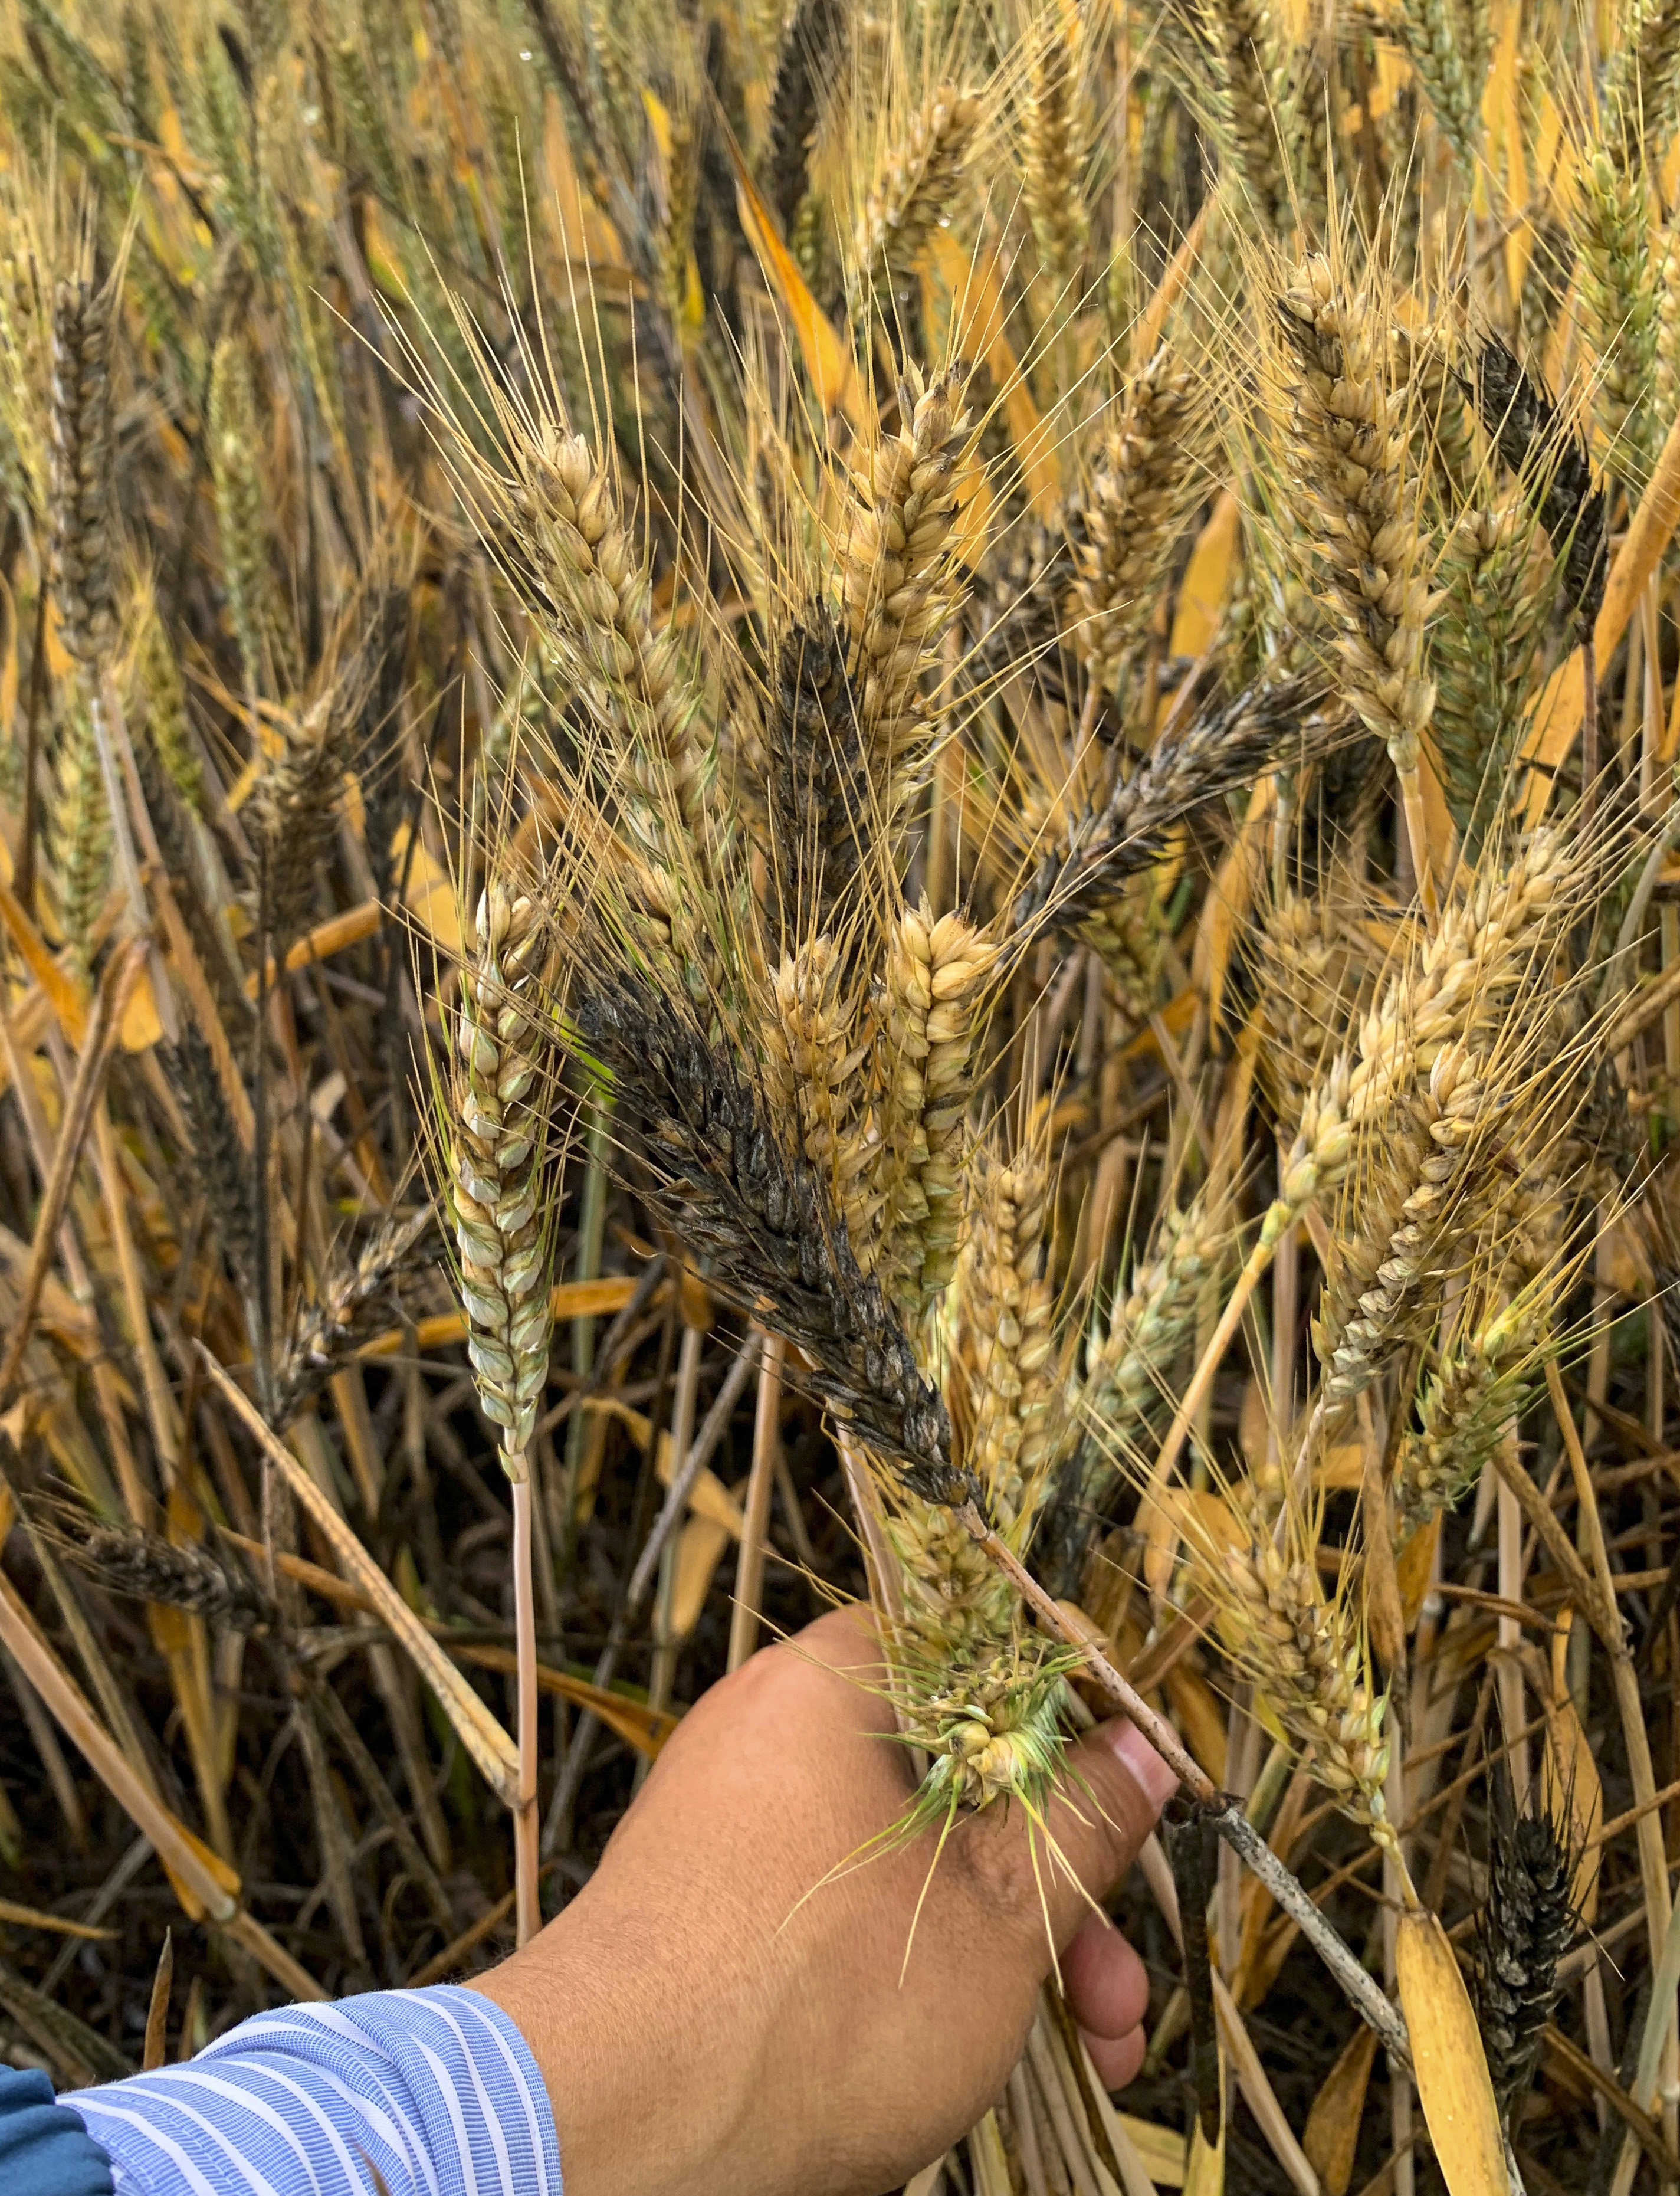 Continuous rain and high humidity across China’s wheat-production base have left large swathes of the crop blighted or affected by sprout damage. Photo: Weibo